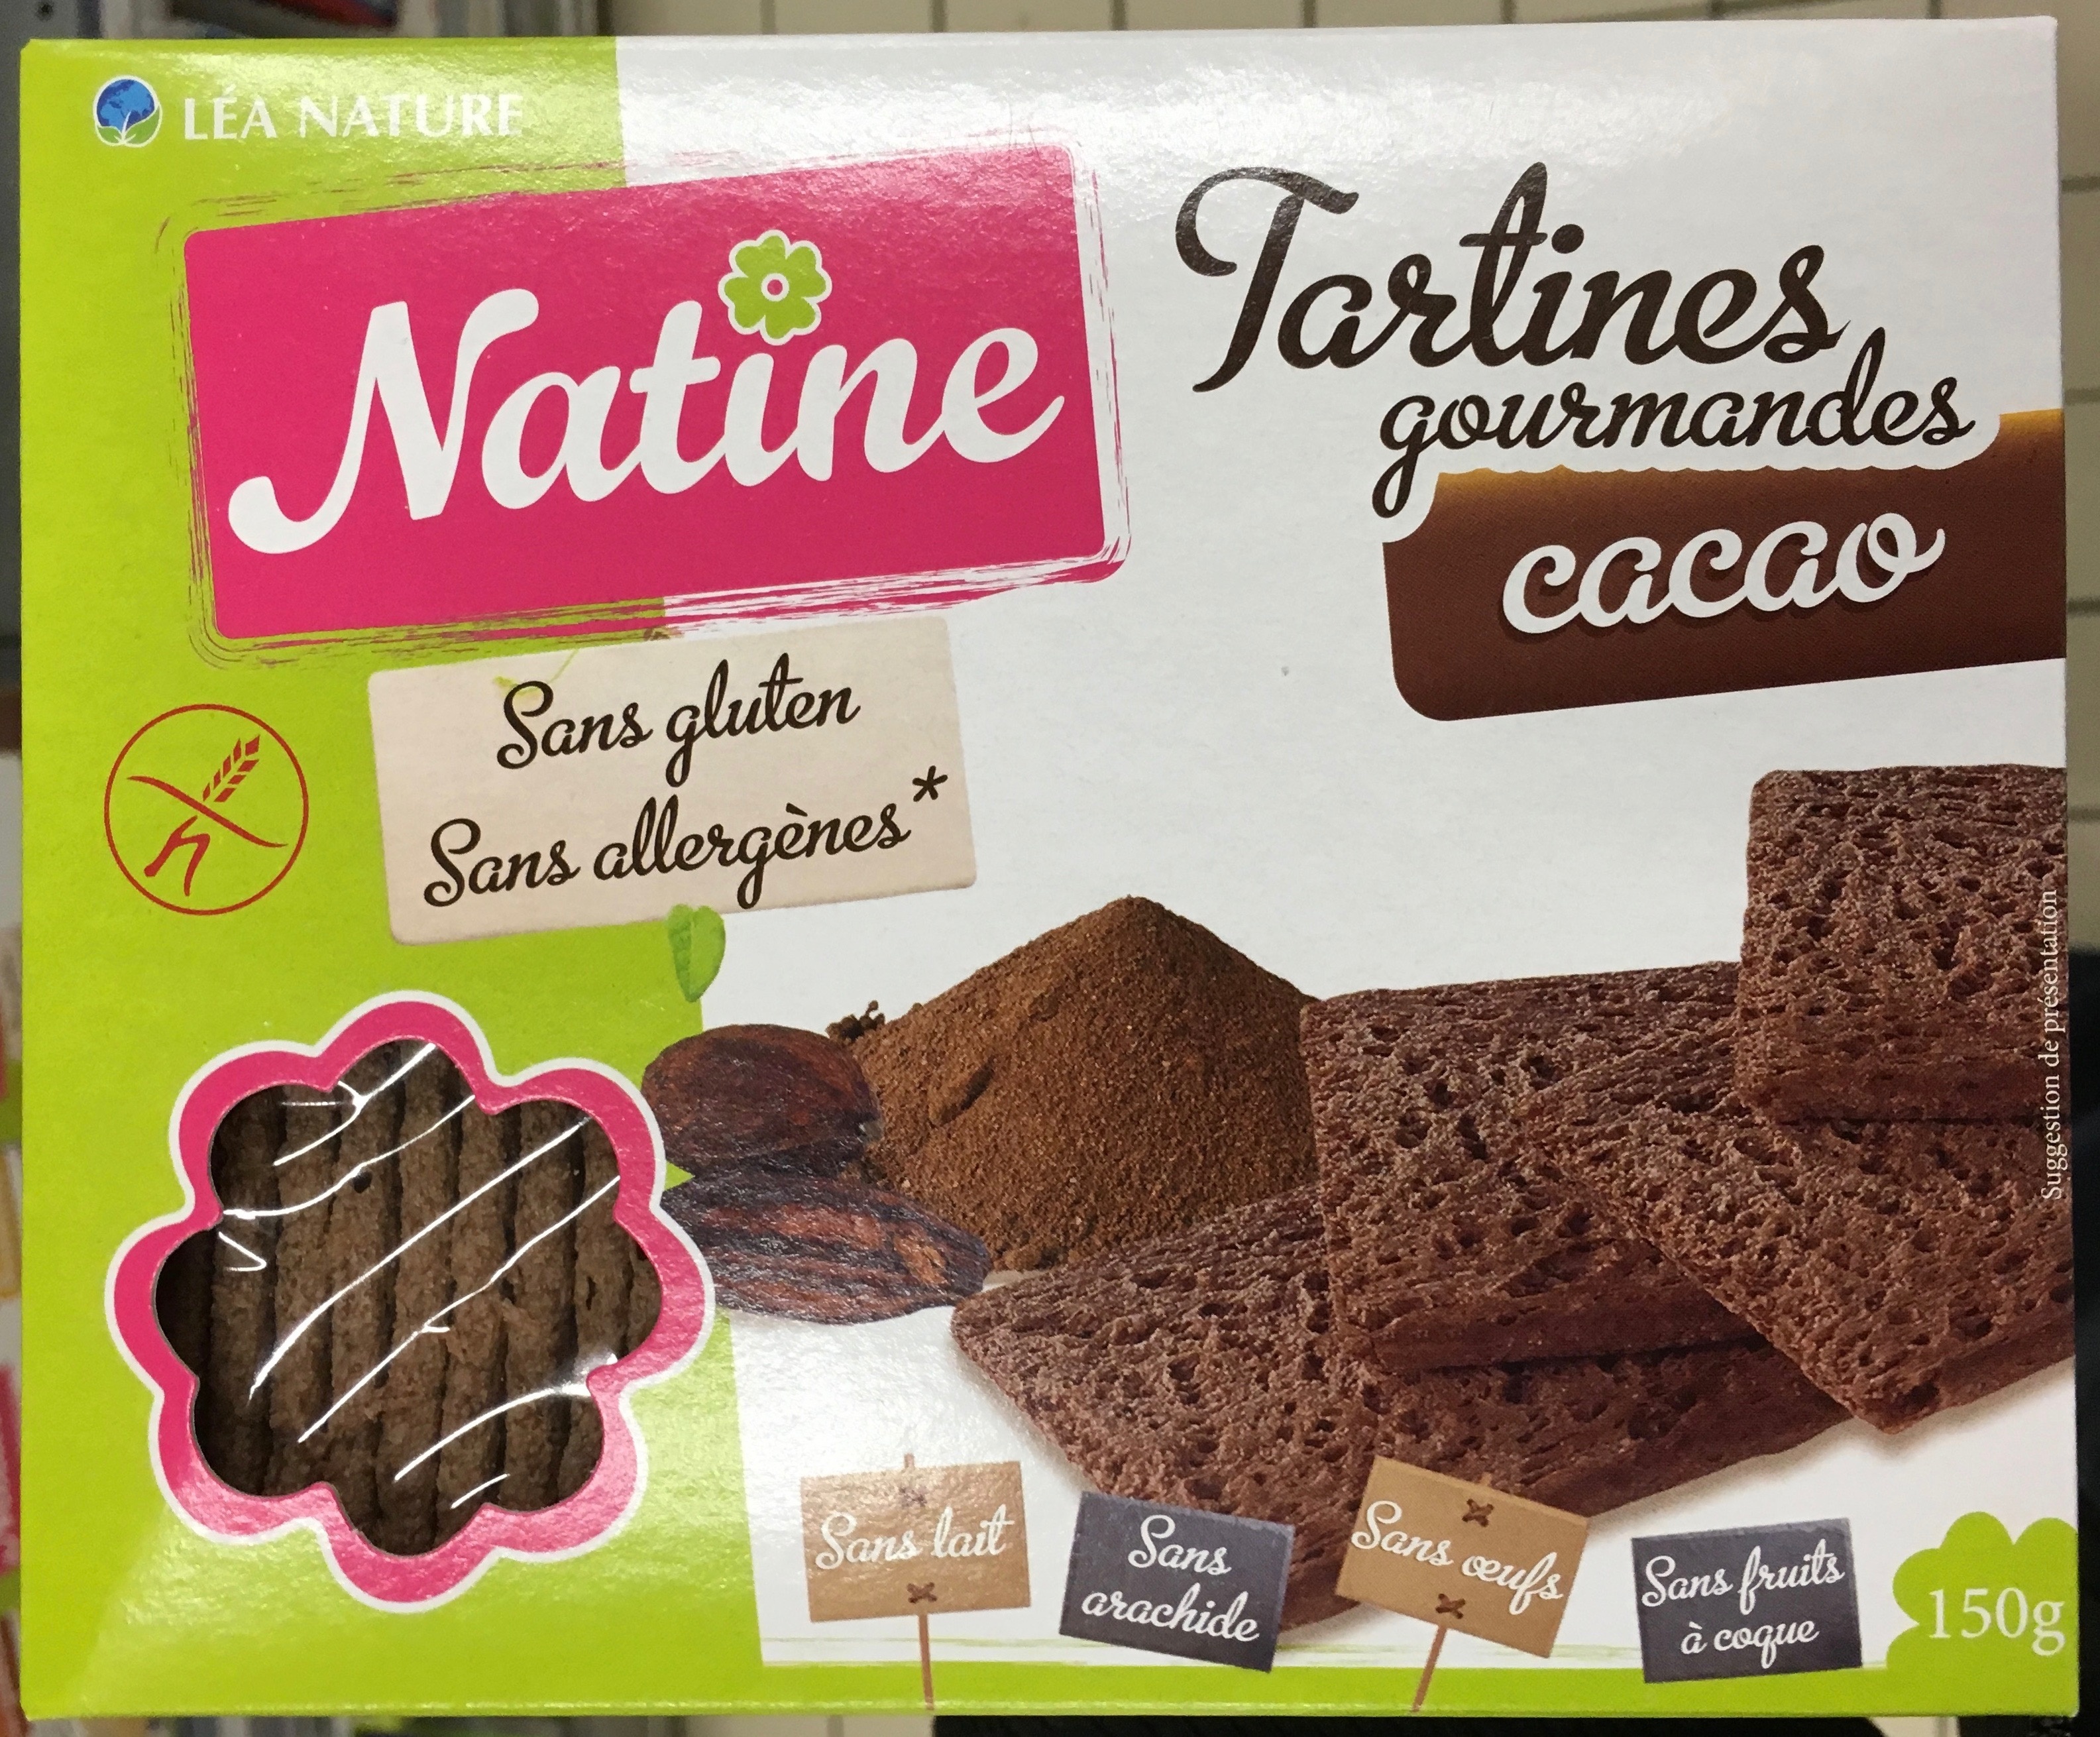 Natine - Tartines gourmandes Cacao - Product - fr